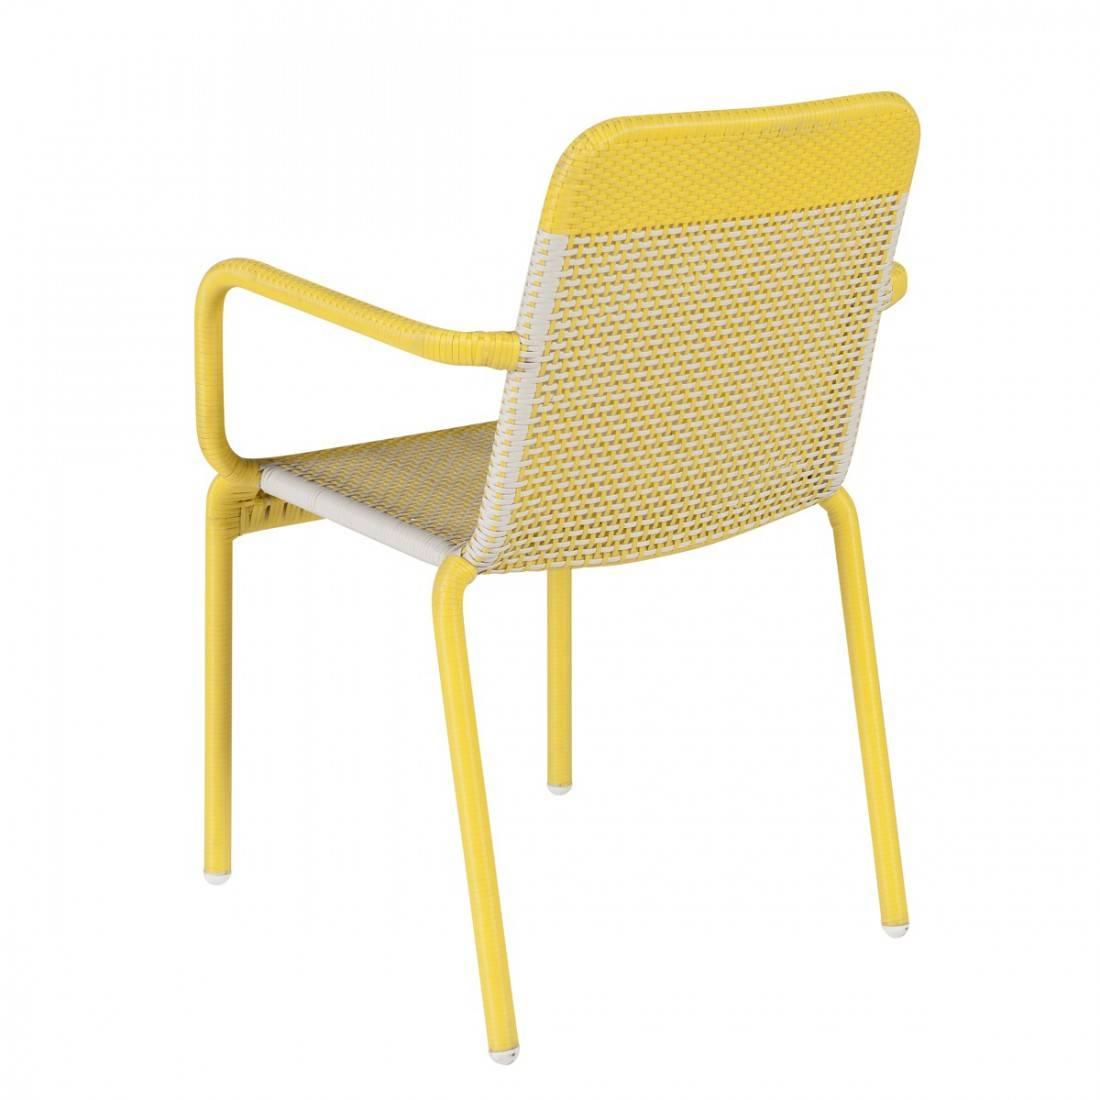 Set of six yellow and warm white braided resin armchairs indoor or outdoor. They will be perfect on your terrace, in your veranda, your winter garden, even around the dining table! Design, retro style, practical (stackable!) never used.